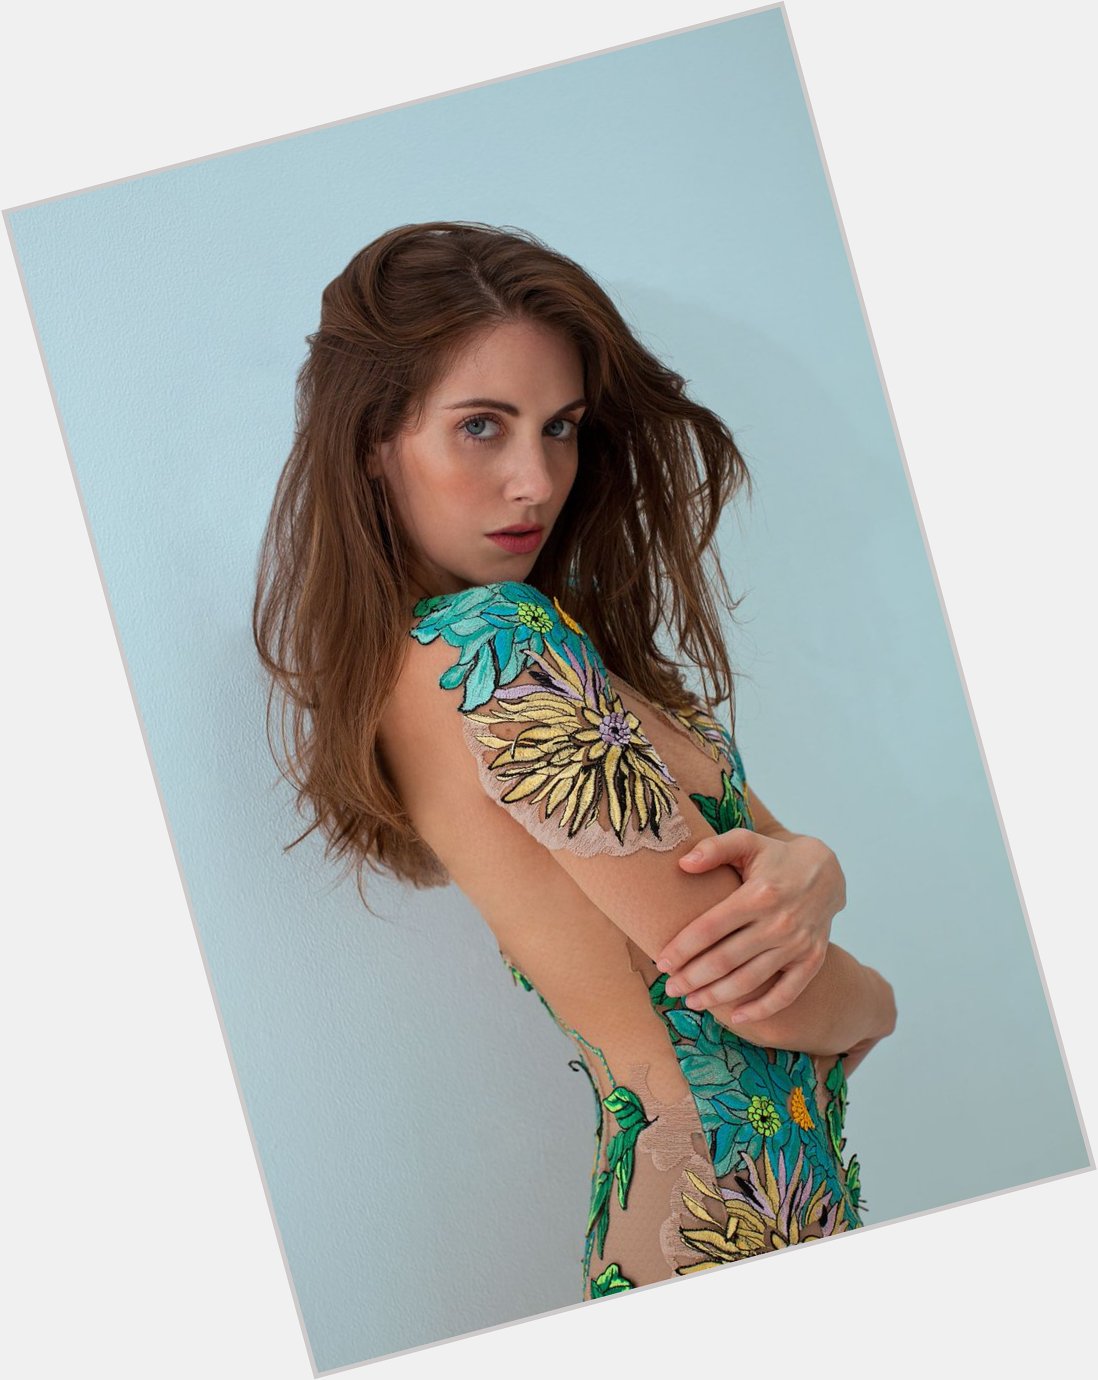 Happy Birthday to Alison Brie.
(December 29, 1982) 